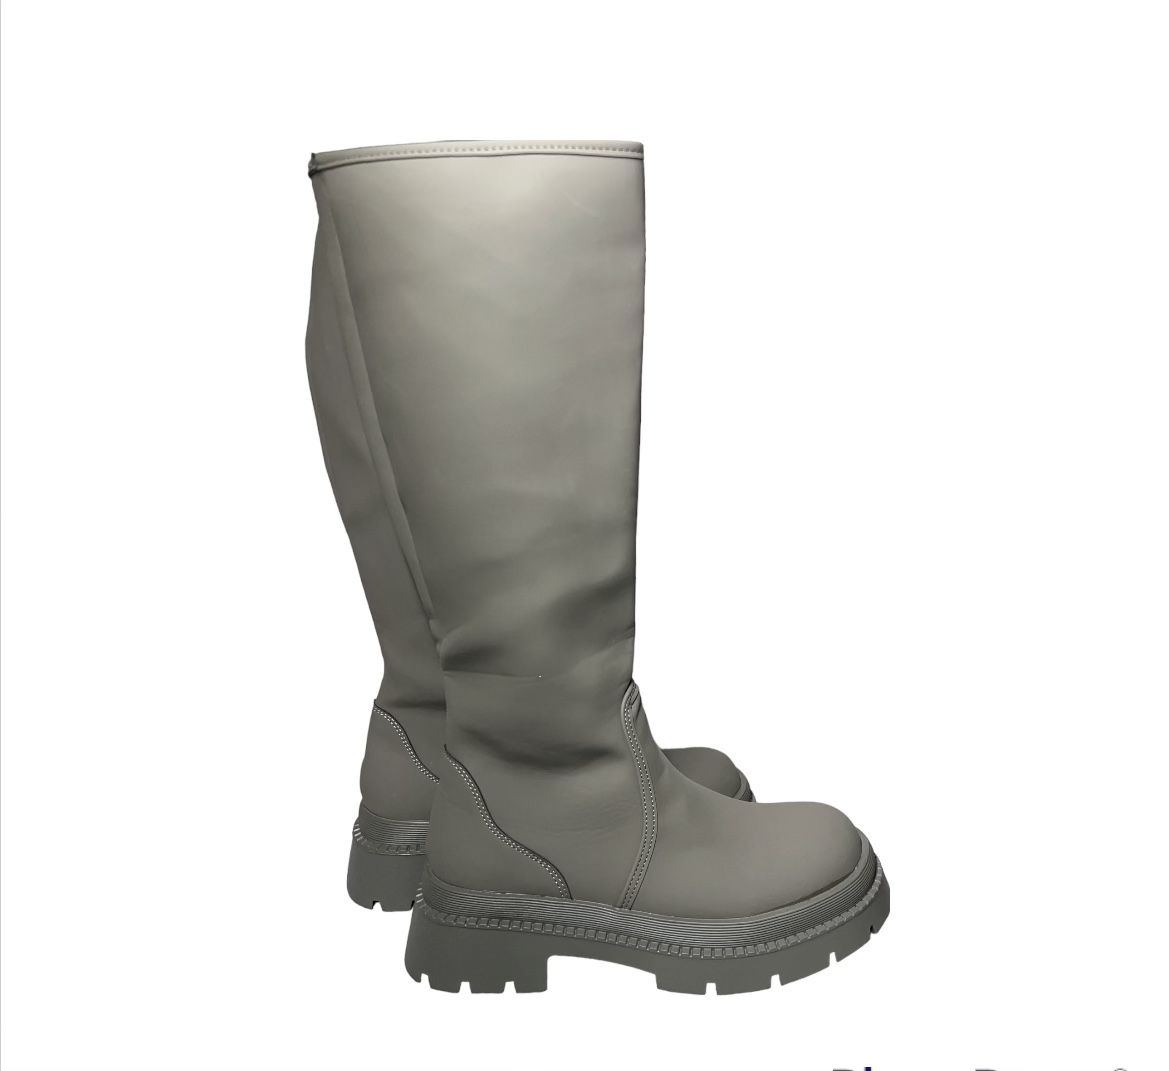 Tall Platform All Weather Fashion Boots- Size (8) Sale